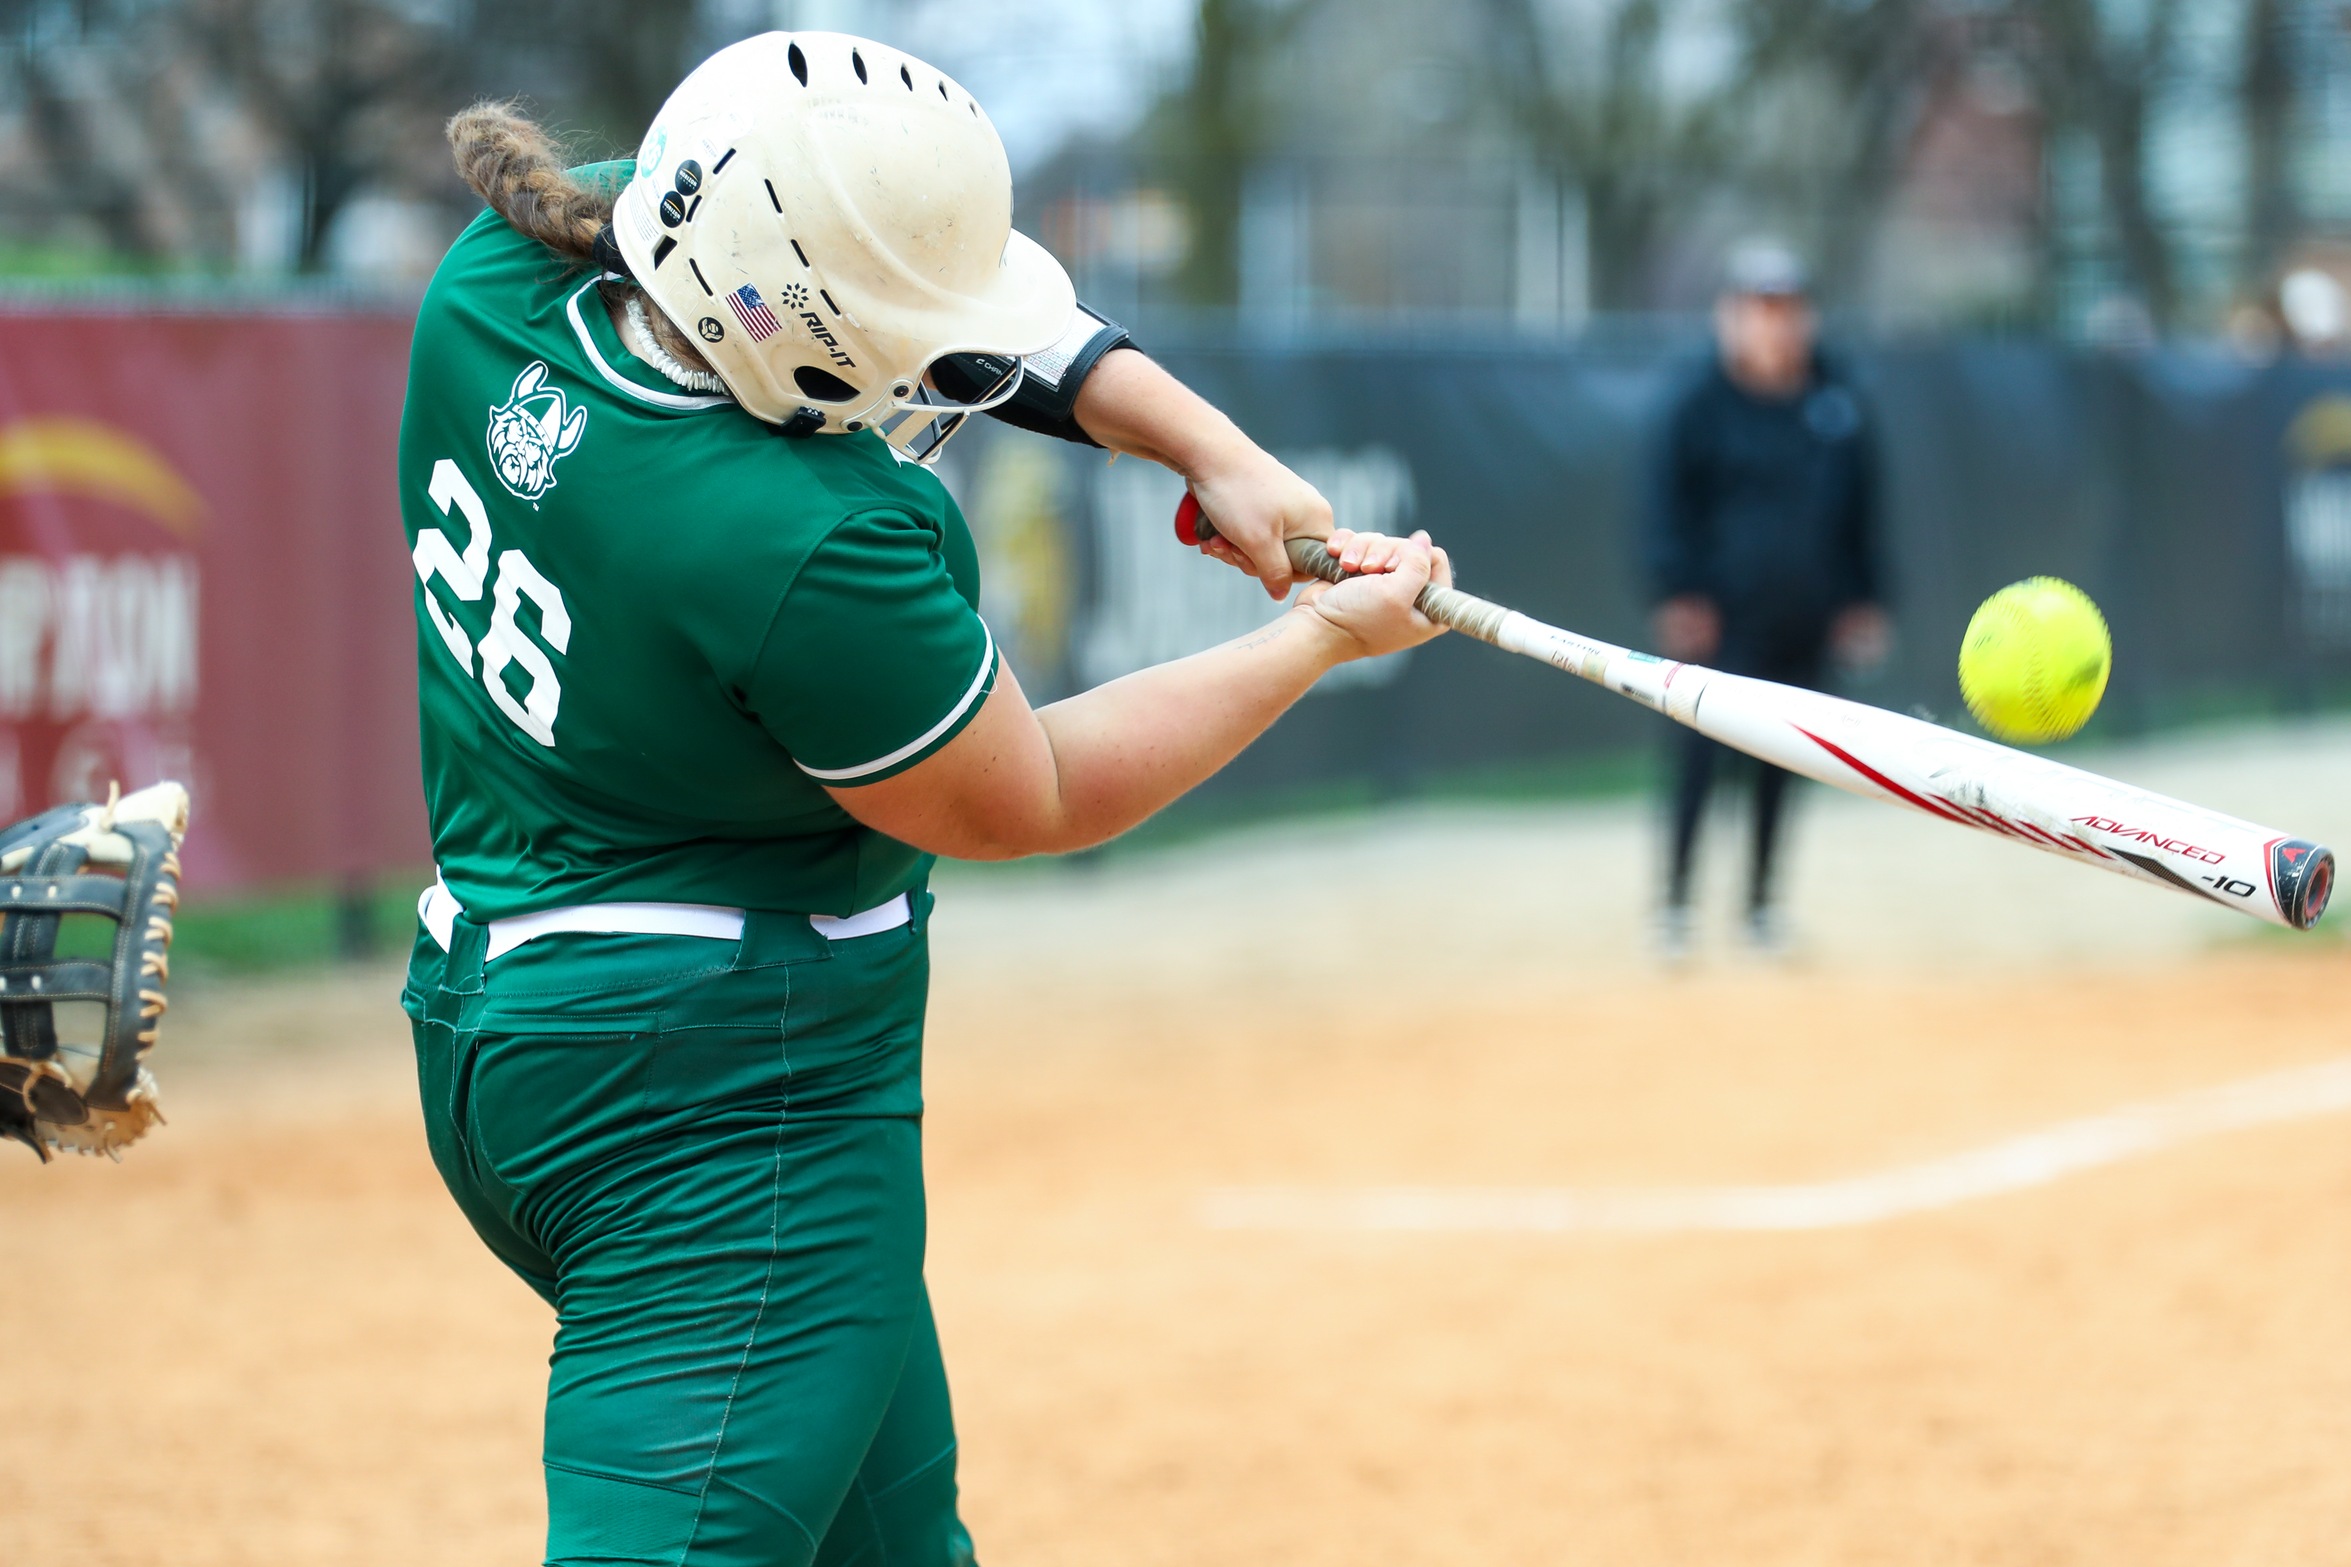 Cleveland State Softball Splits Saturday Doubleheader to Earn Series Win at Green Bay